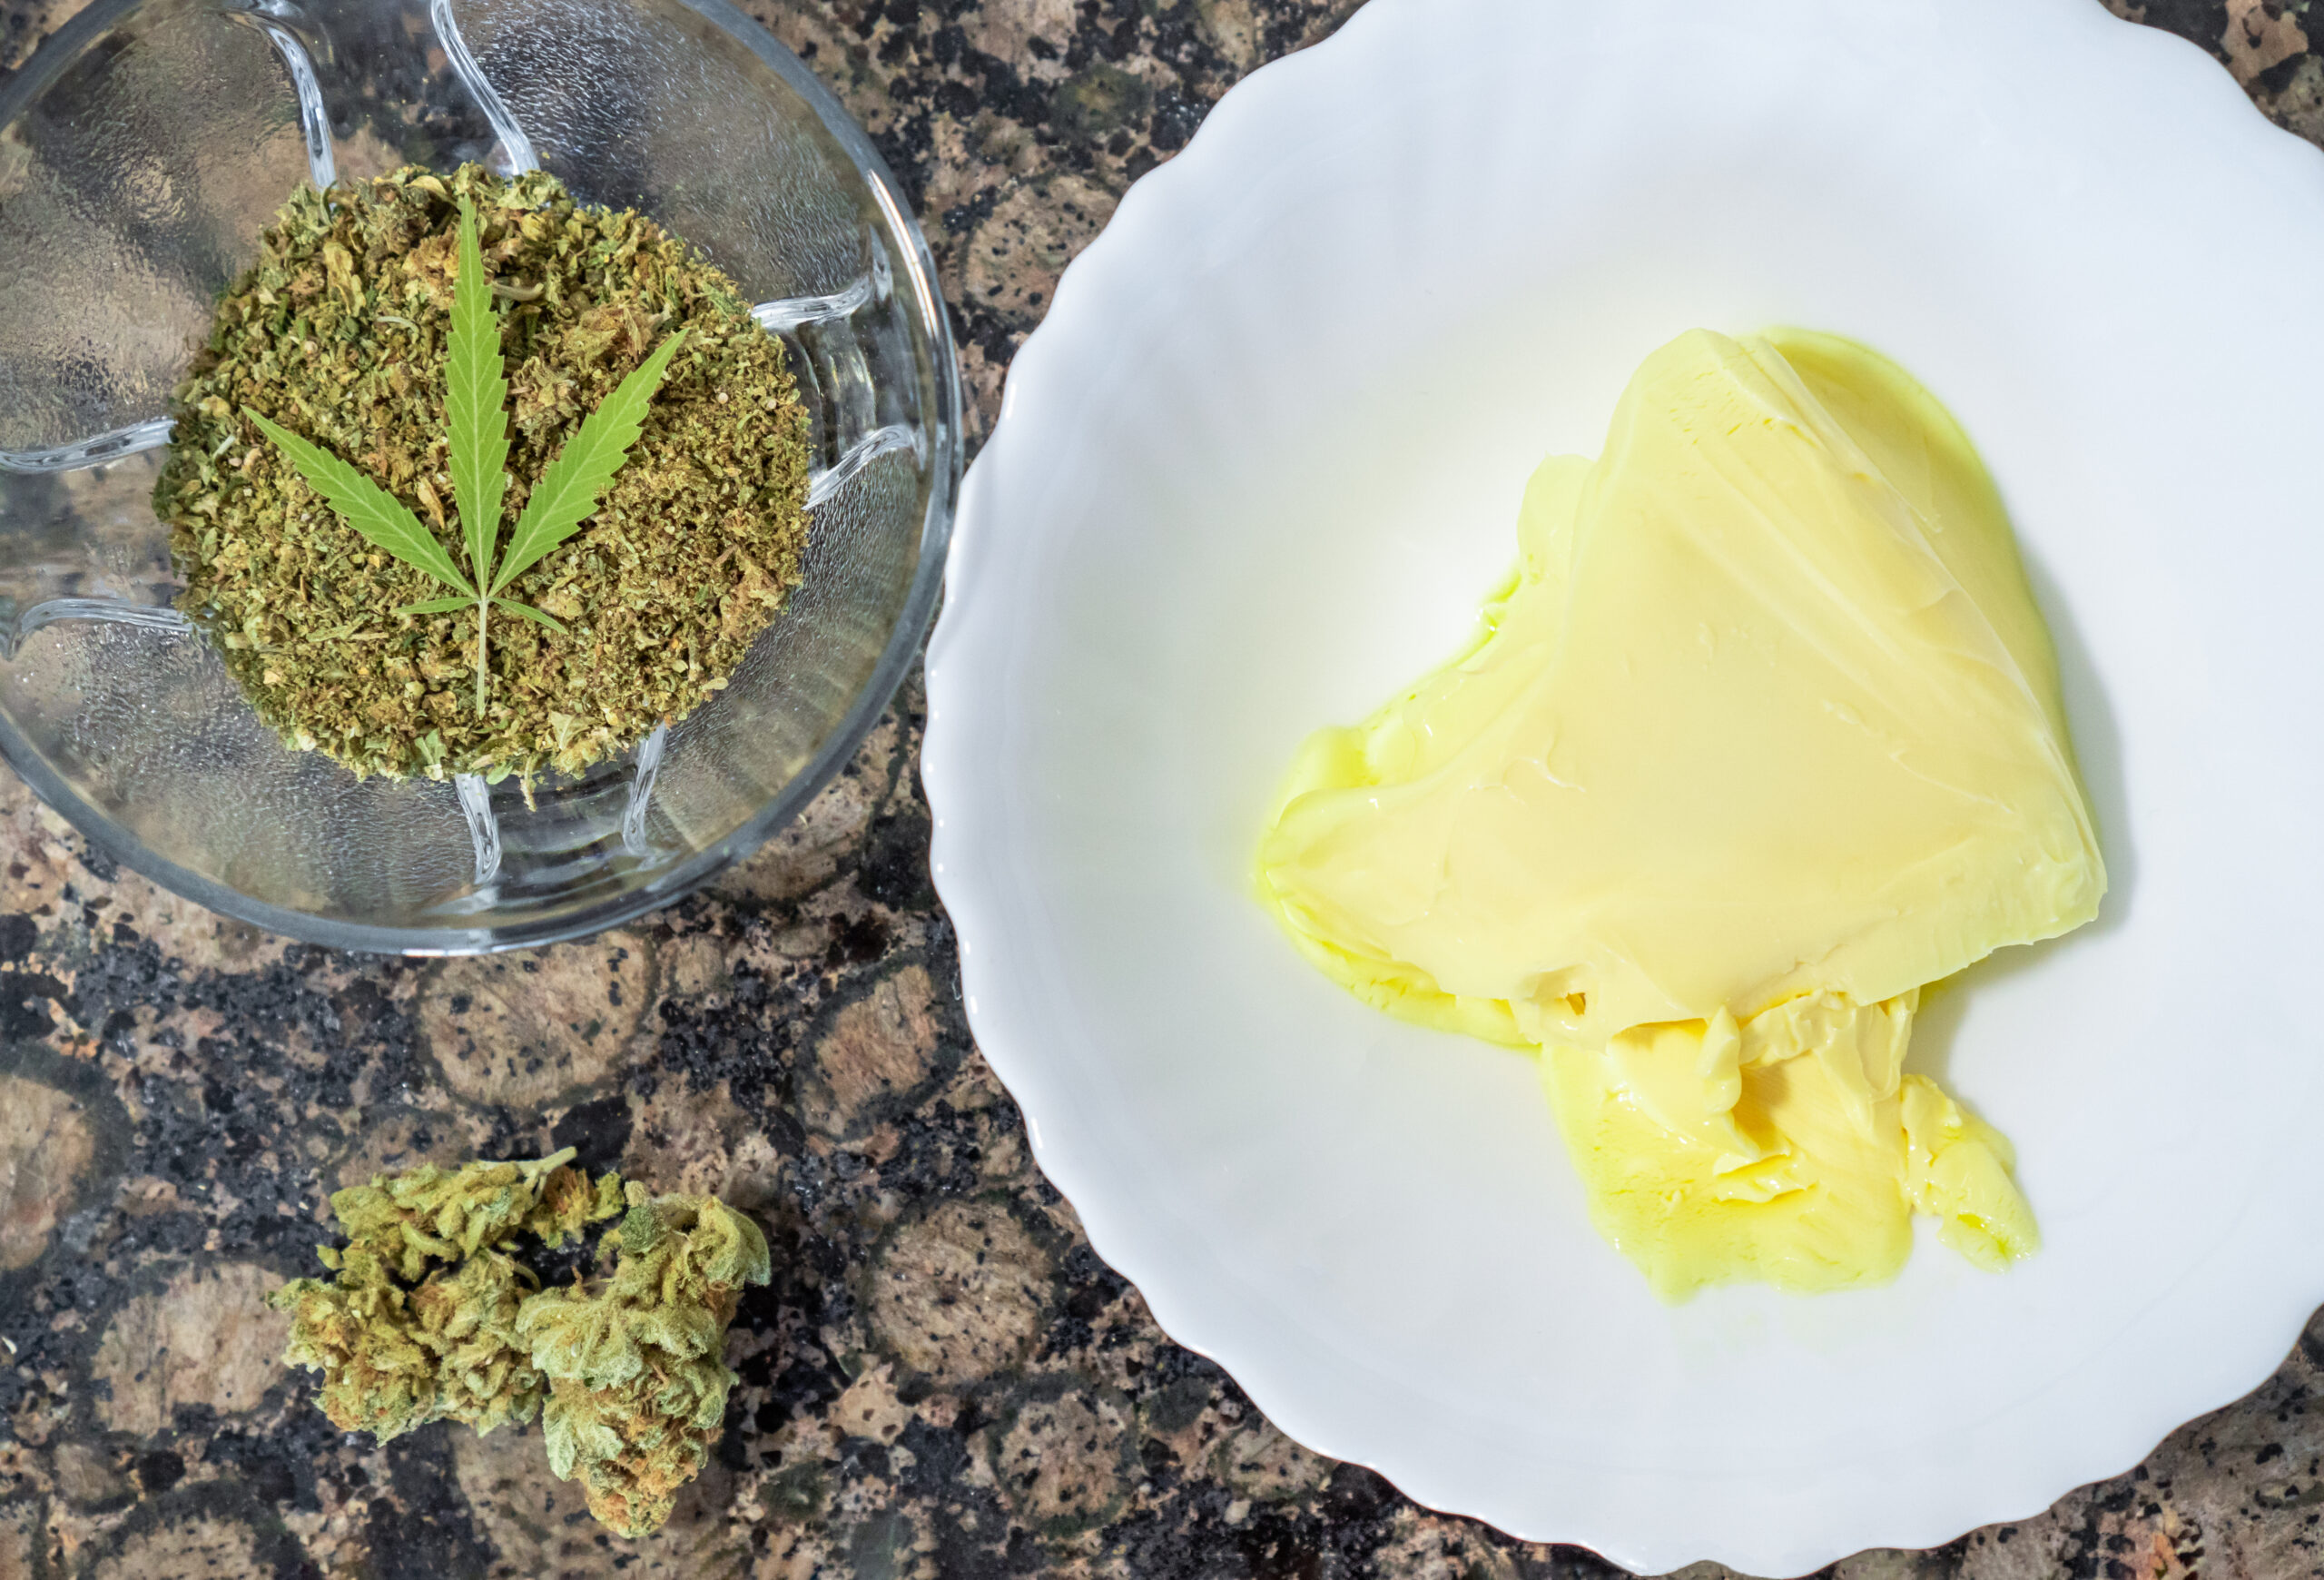 How to make a small batch of cannabutter?